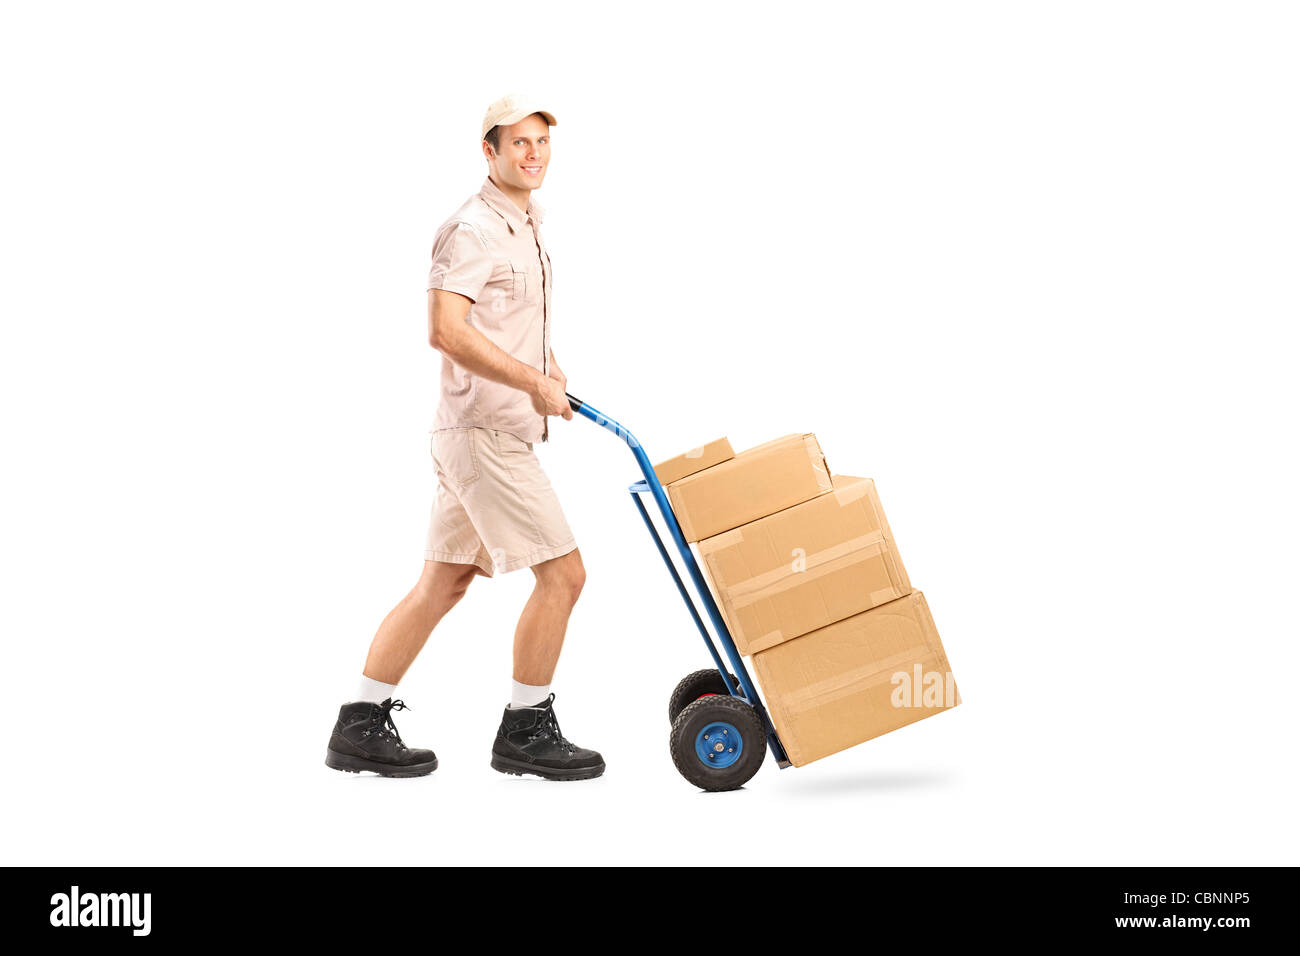 Full length portrait of a delivery boy pushing a handtruck Stock Photo